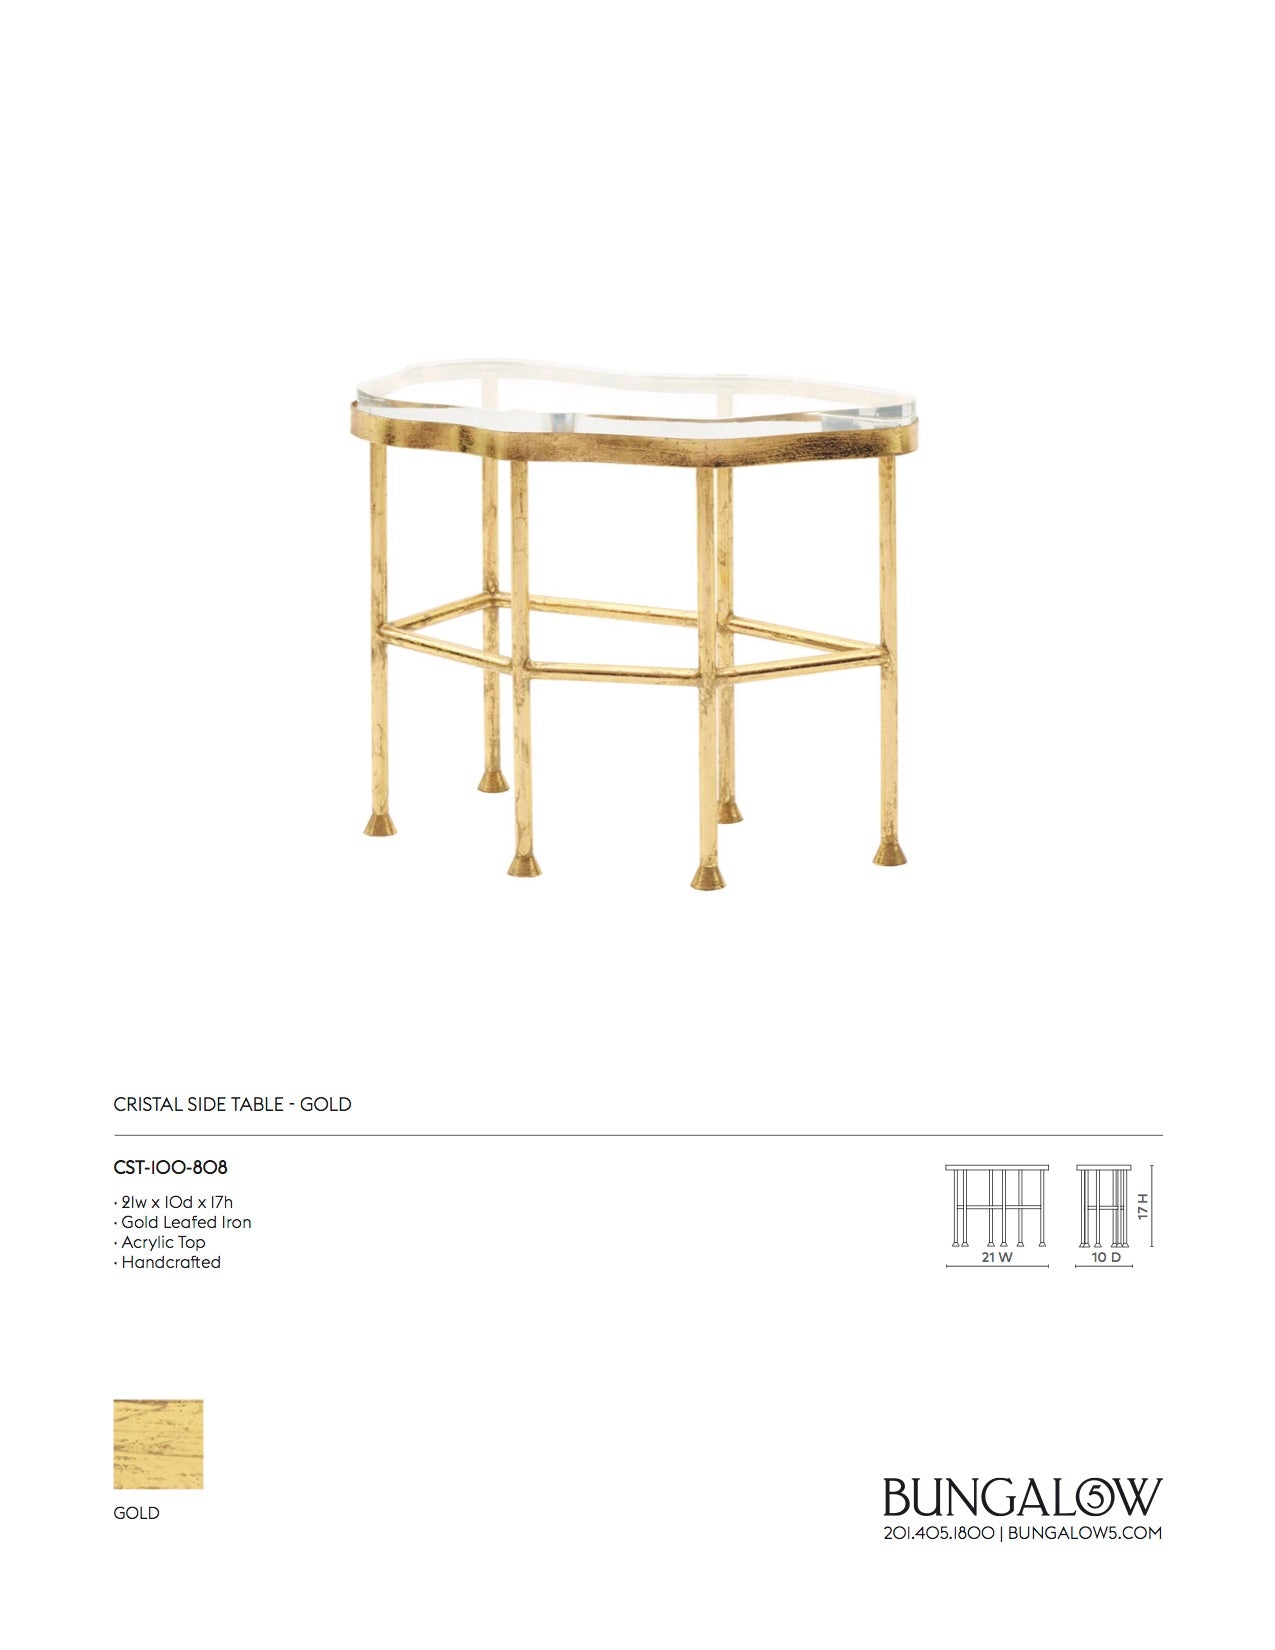 Bungalow 5 Cristal Side Table Gold Tearsheet